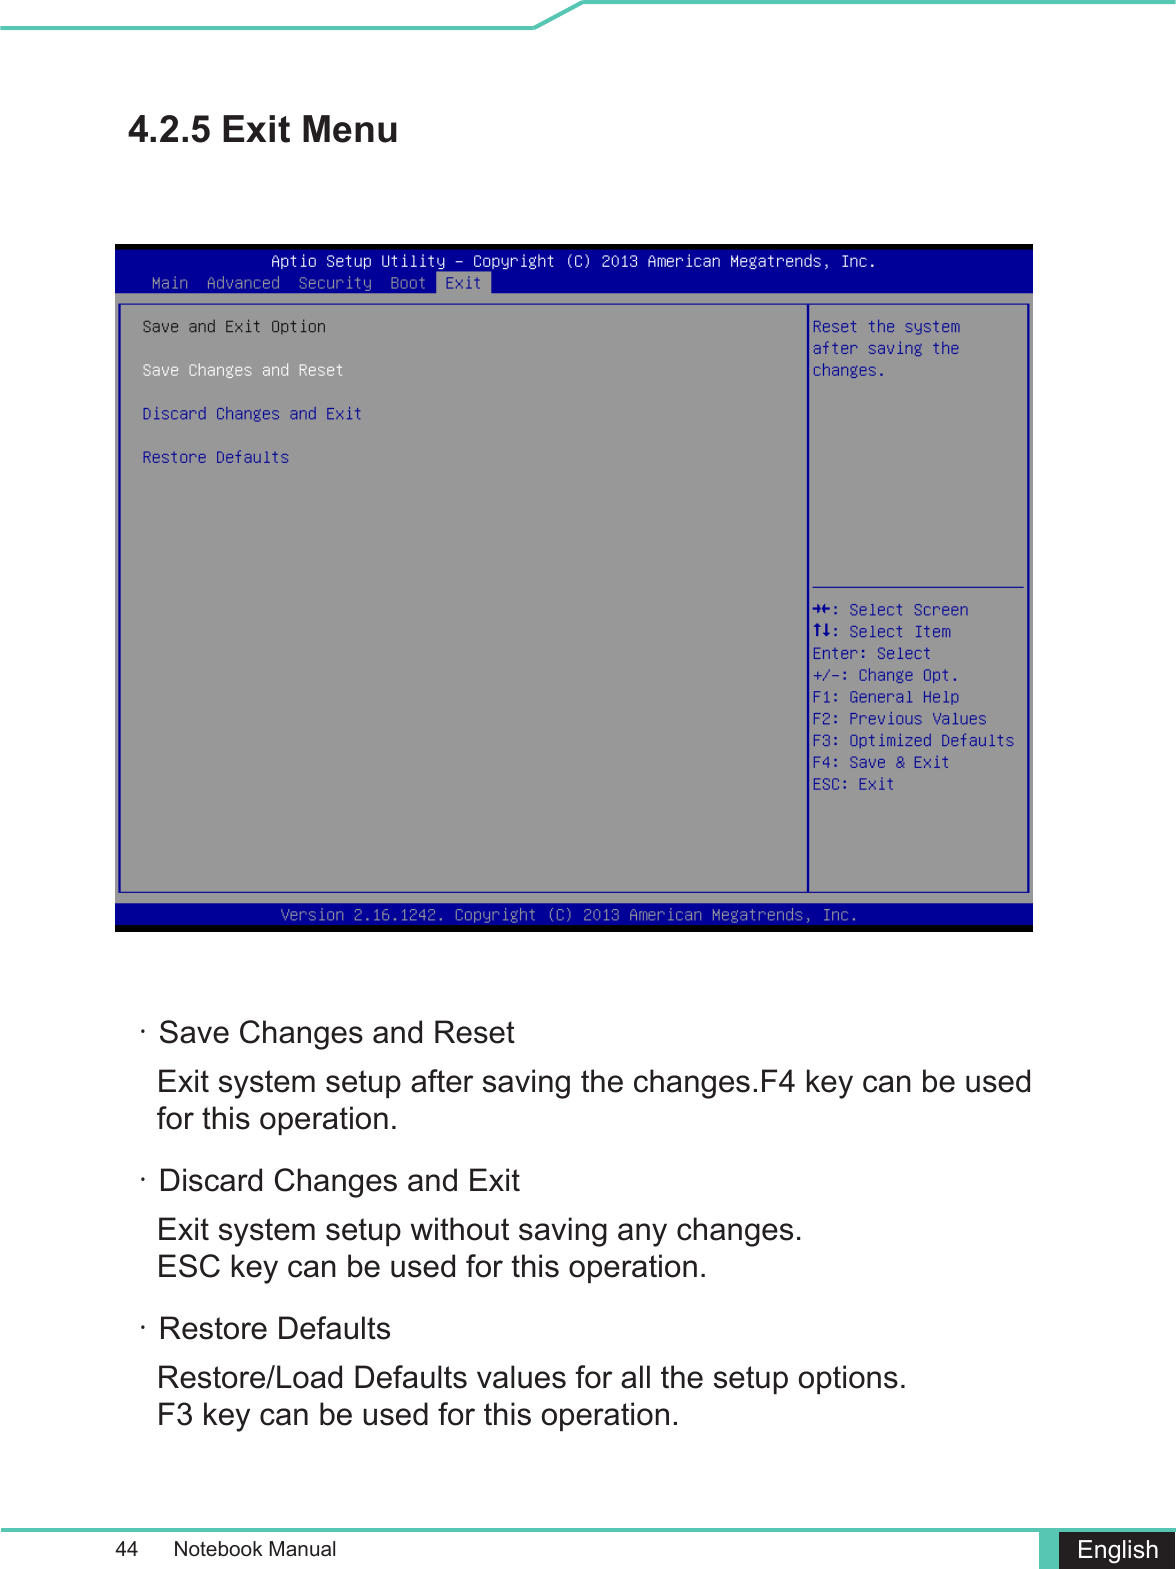 44      Notebook Manual English4.2.5 Exit Menu・Save Changes and ResetExit system setup after saving the changes.F4 key can be used for this operation.・Discard Changes and ExitExit system setup without saving any changes. ESC key can be used for this operation.・Restore DefaultsRestore/Load Defaults values for all the setup options. F3 key can be used for this operation.